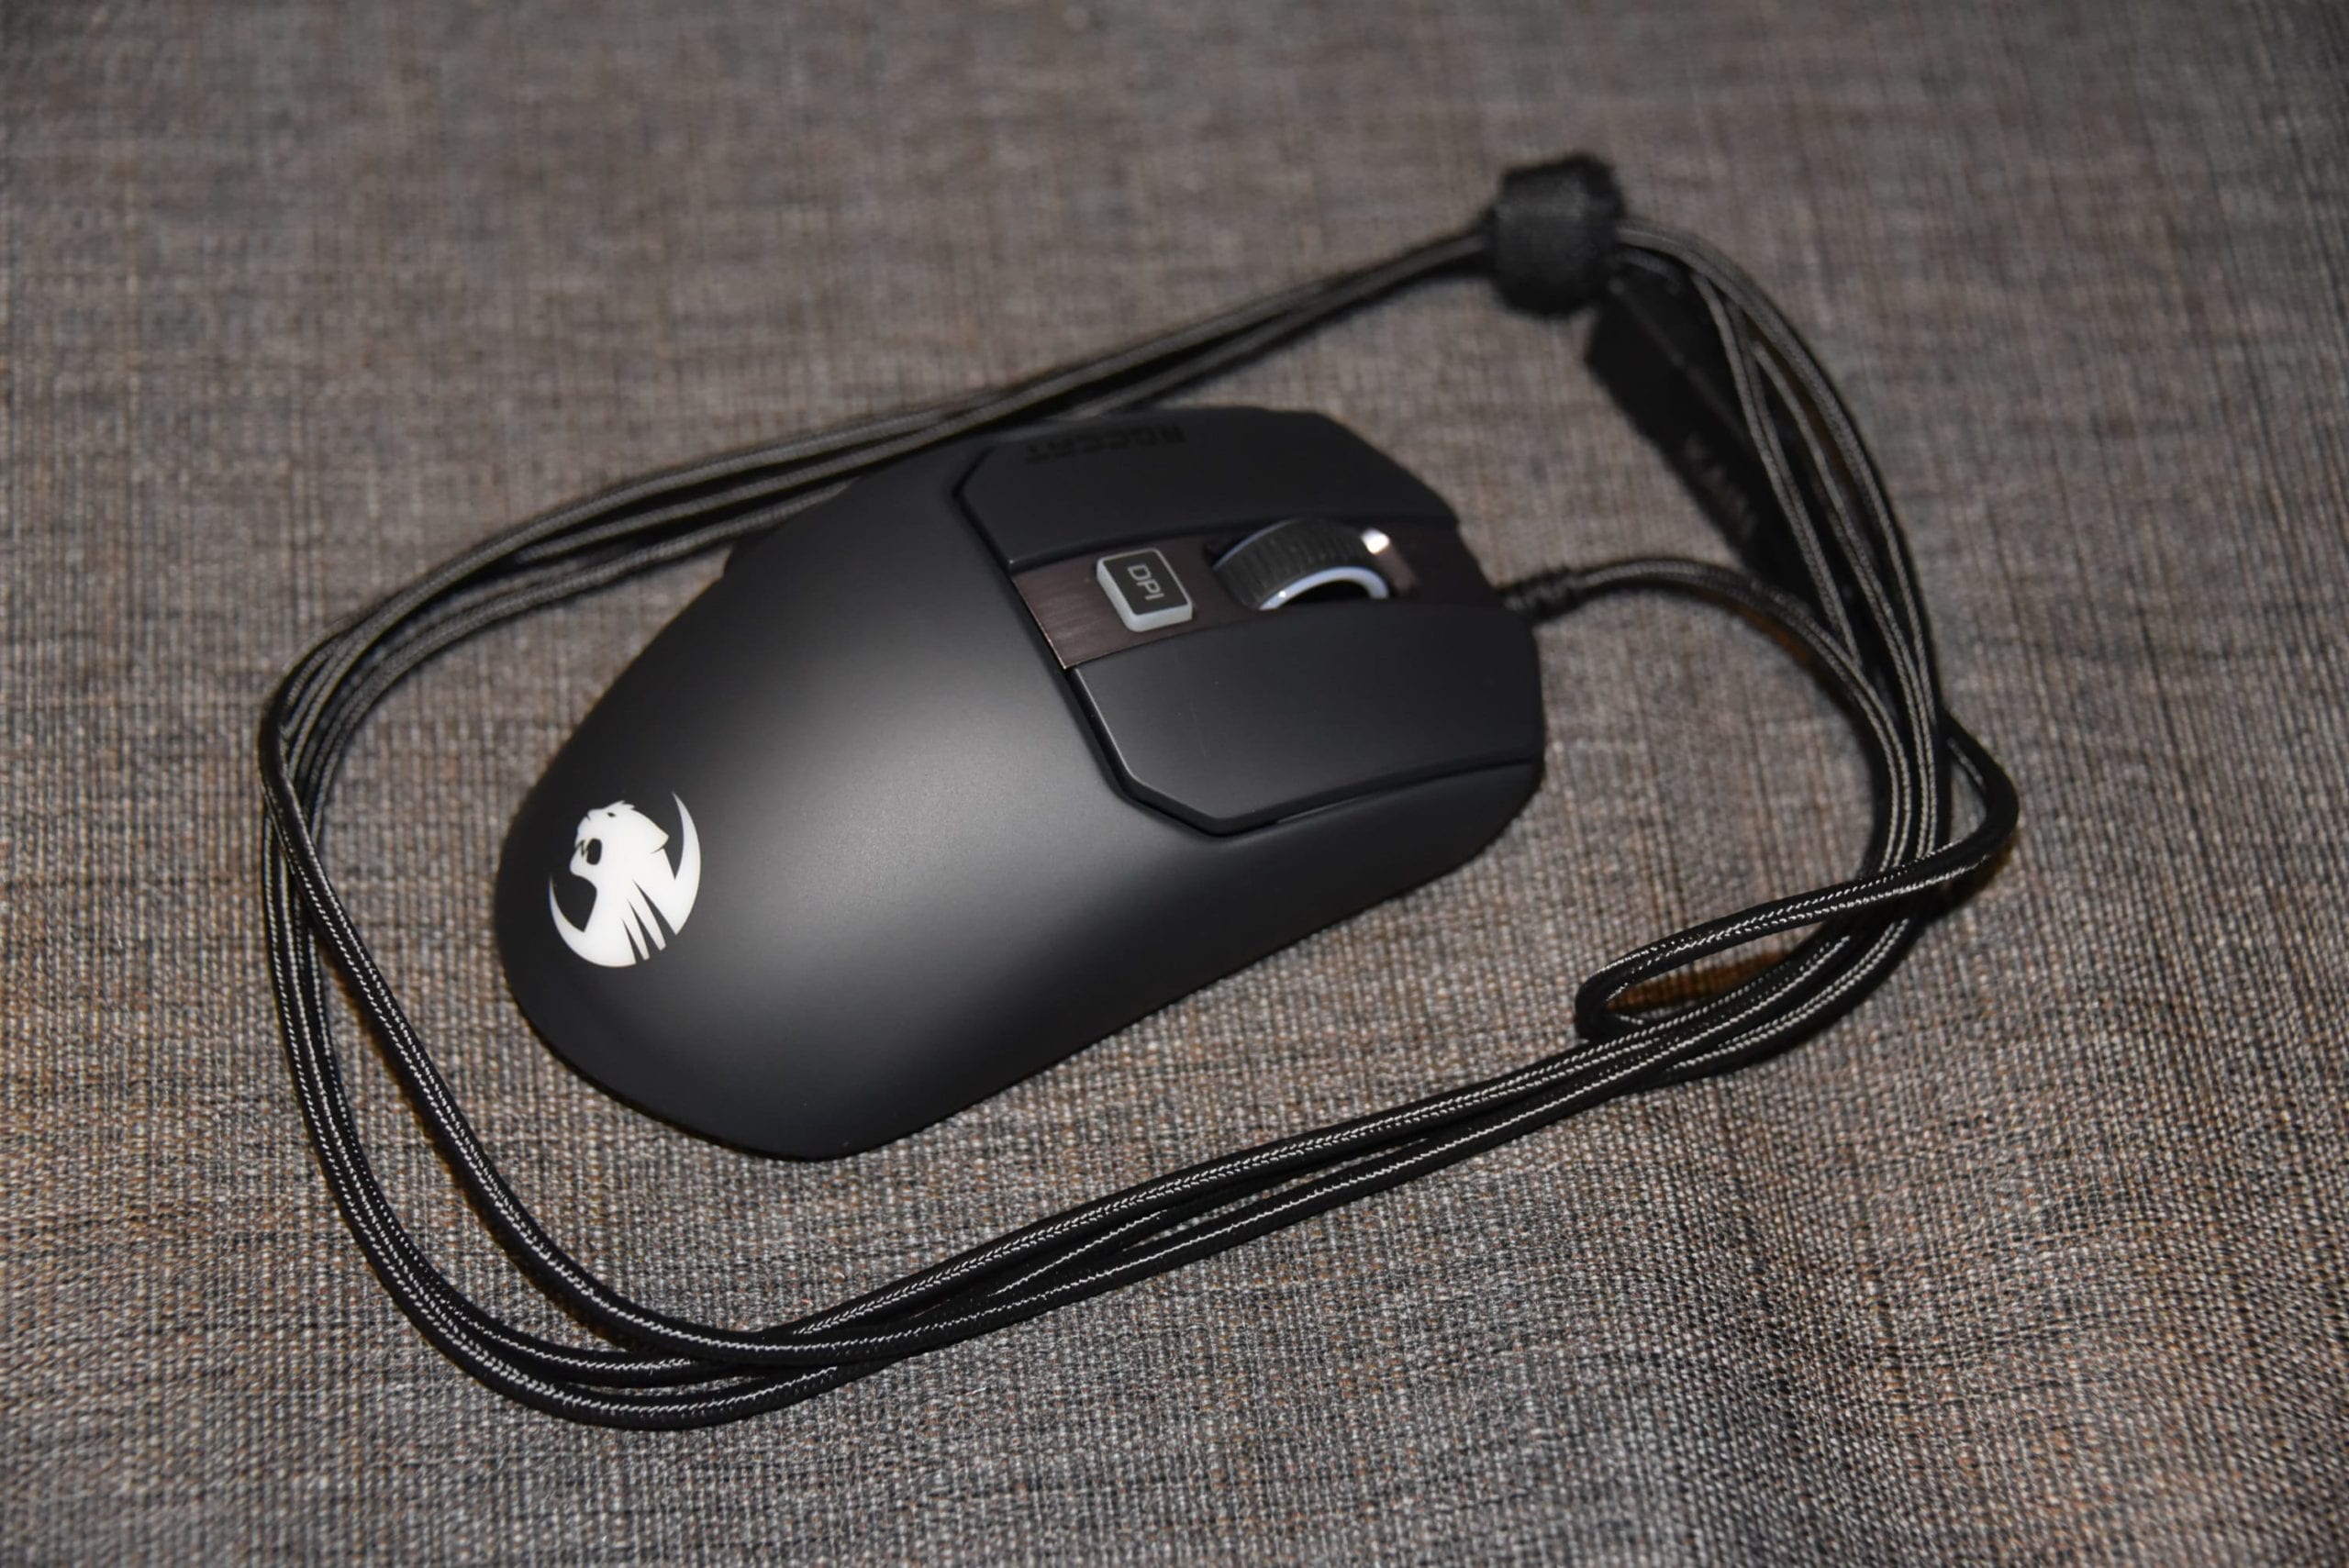 Review Roccat Kain 1 Aimo Mouse Movies Games And Tech